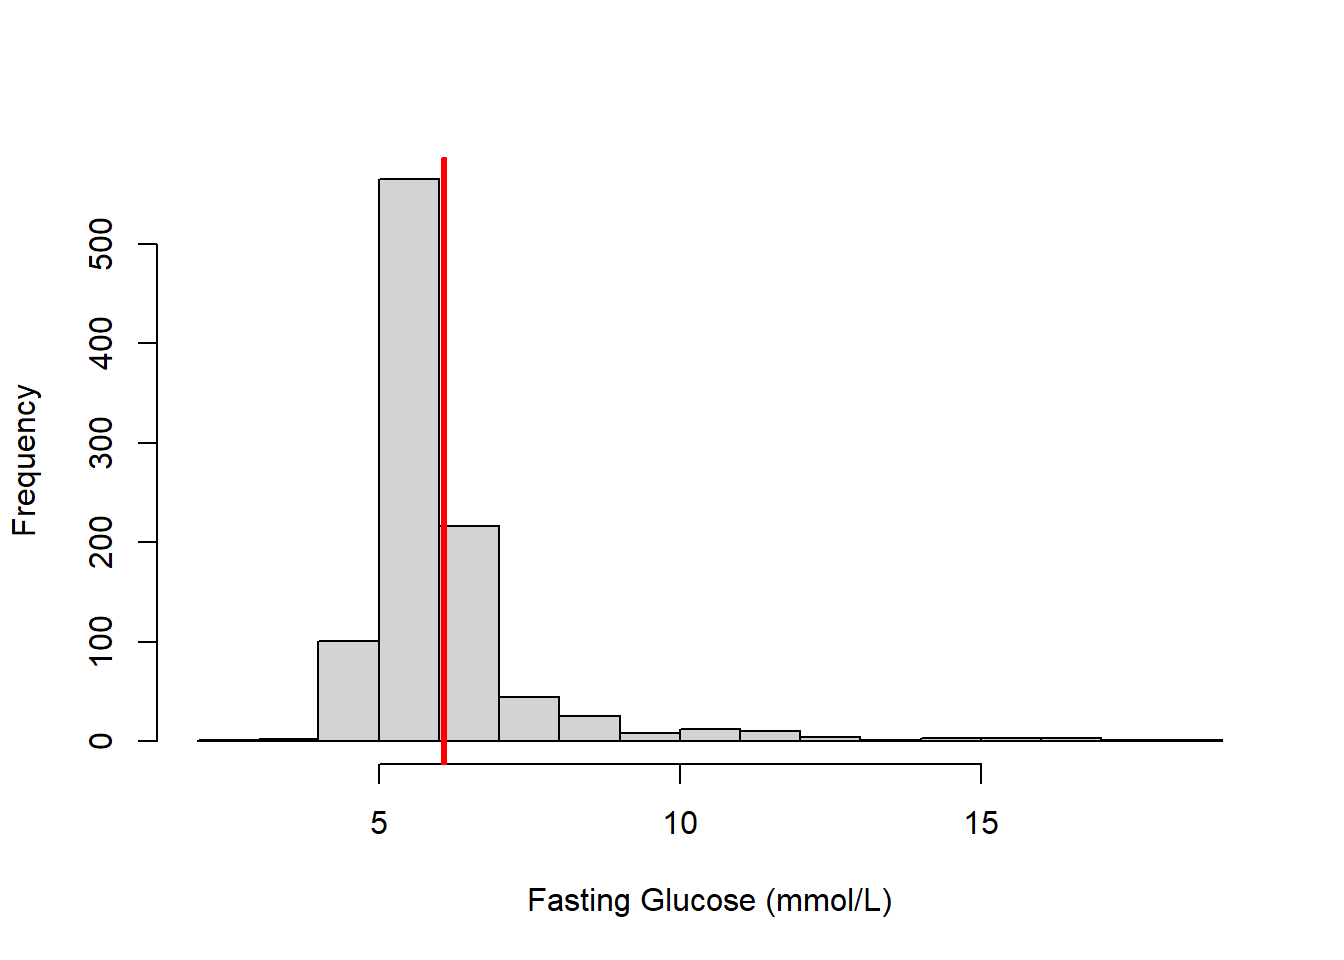 Simple linear regression of fasting glucose on waist circumference